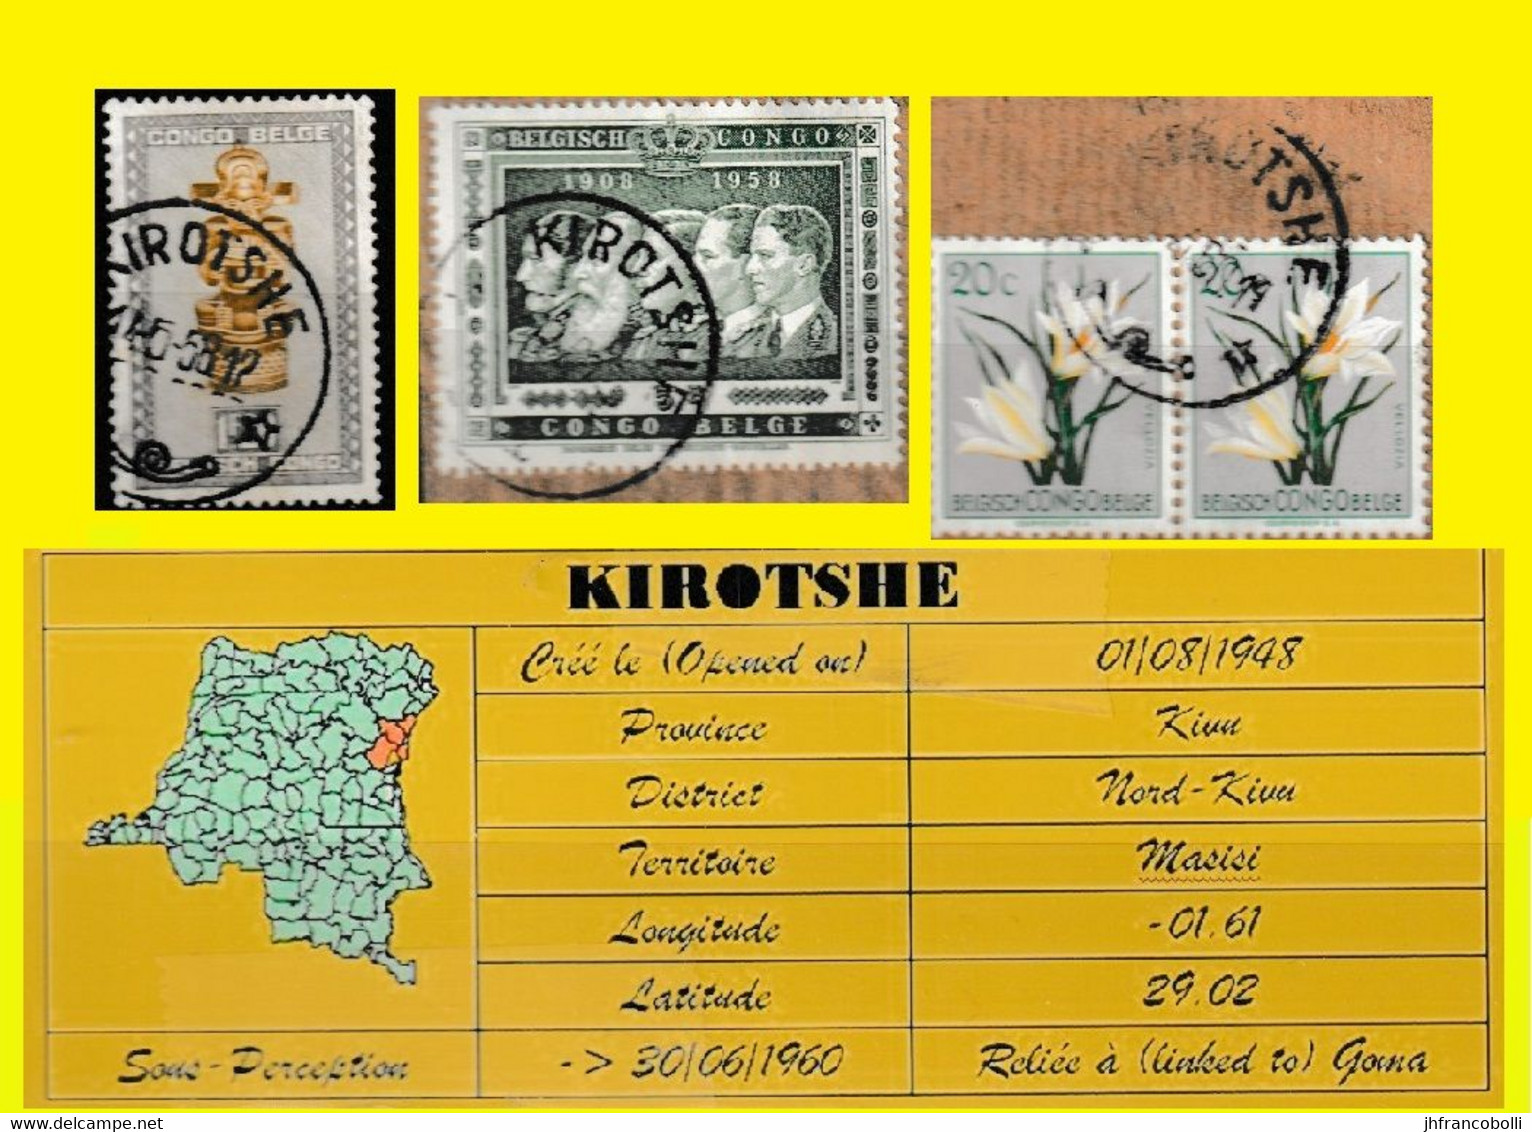 1948 (°) BELGIAN CONGO / CONGO BELGE = KIROTSHE [A] CANCELS 288 + 291-A+305+347 FOUR STAMPS (ROUND CANCELS) - Errors & Oddities